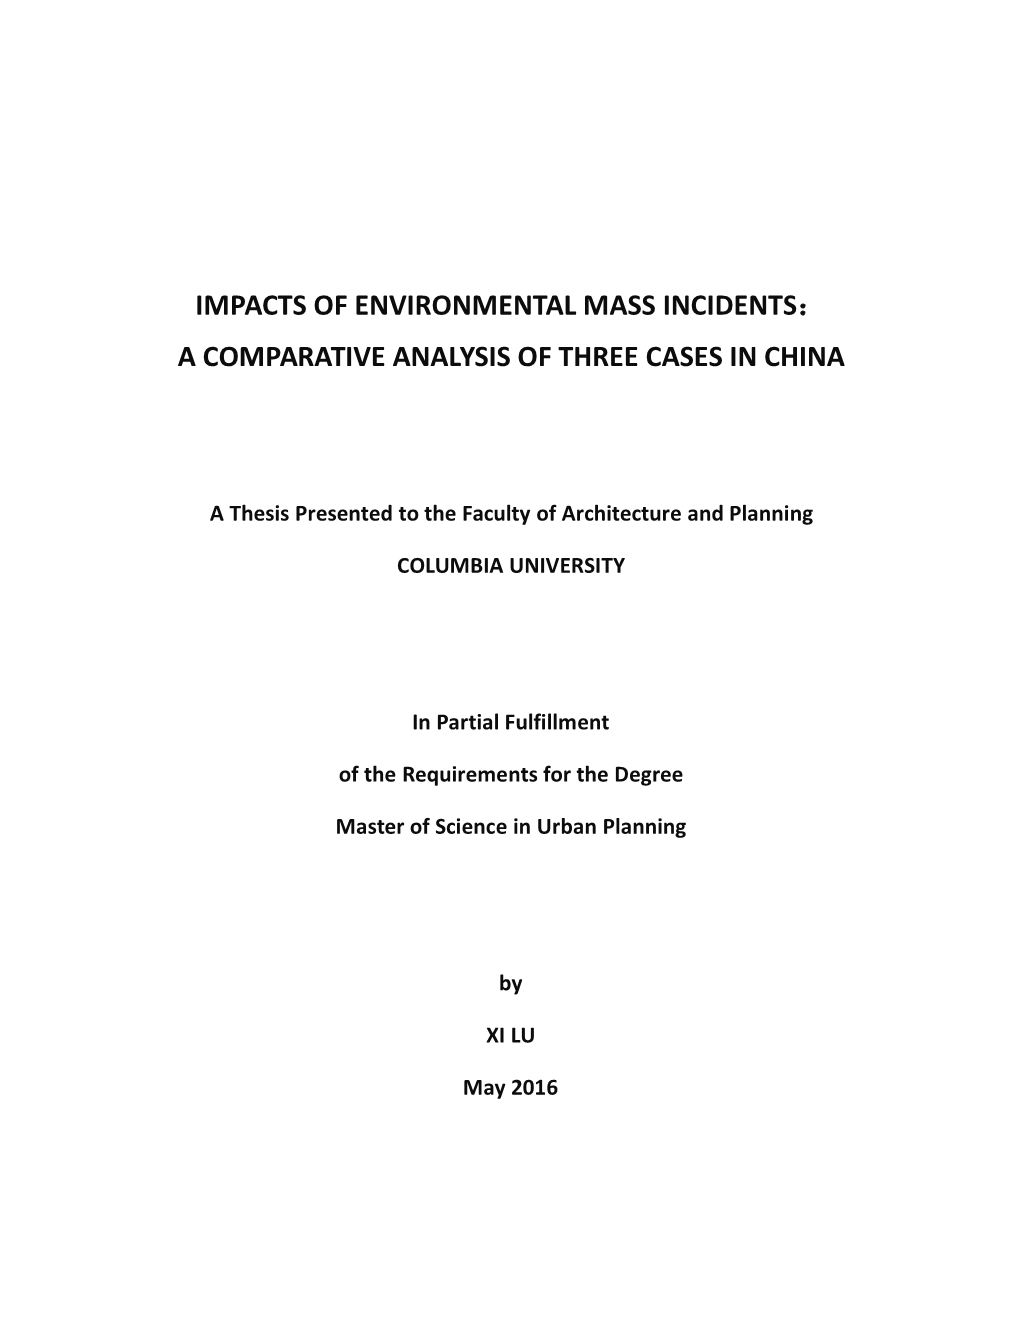 Impacts of Environmental Mass Incidents： a Comparative Analysis of Three Cases in China